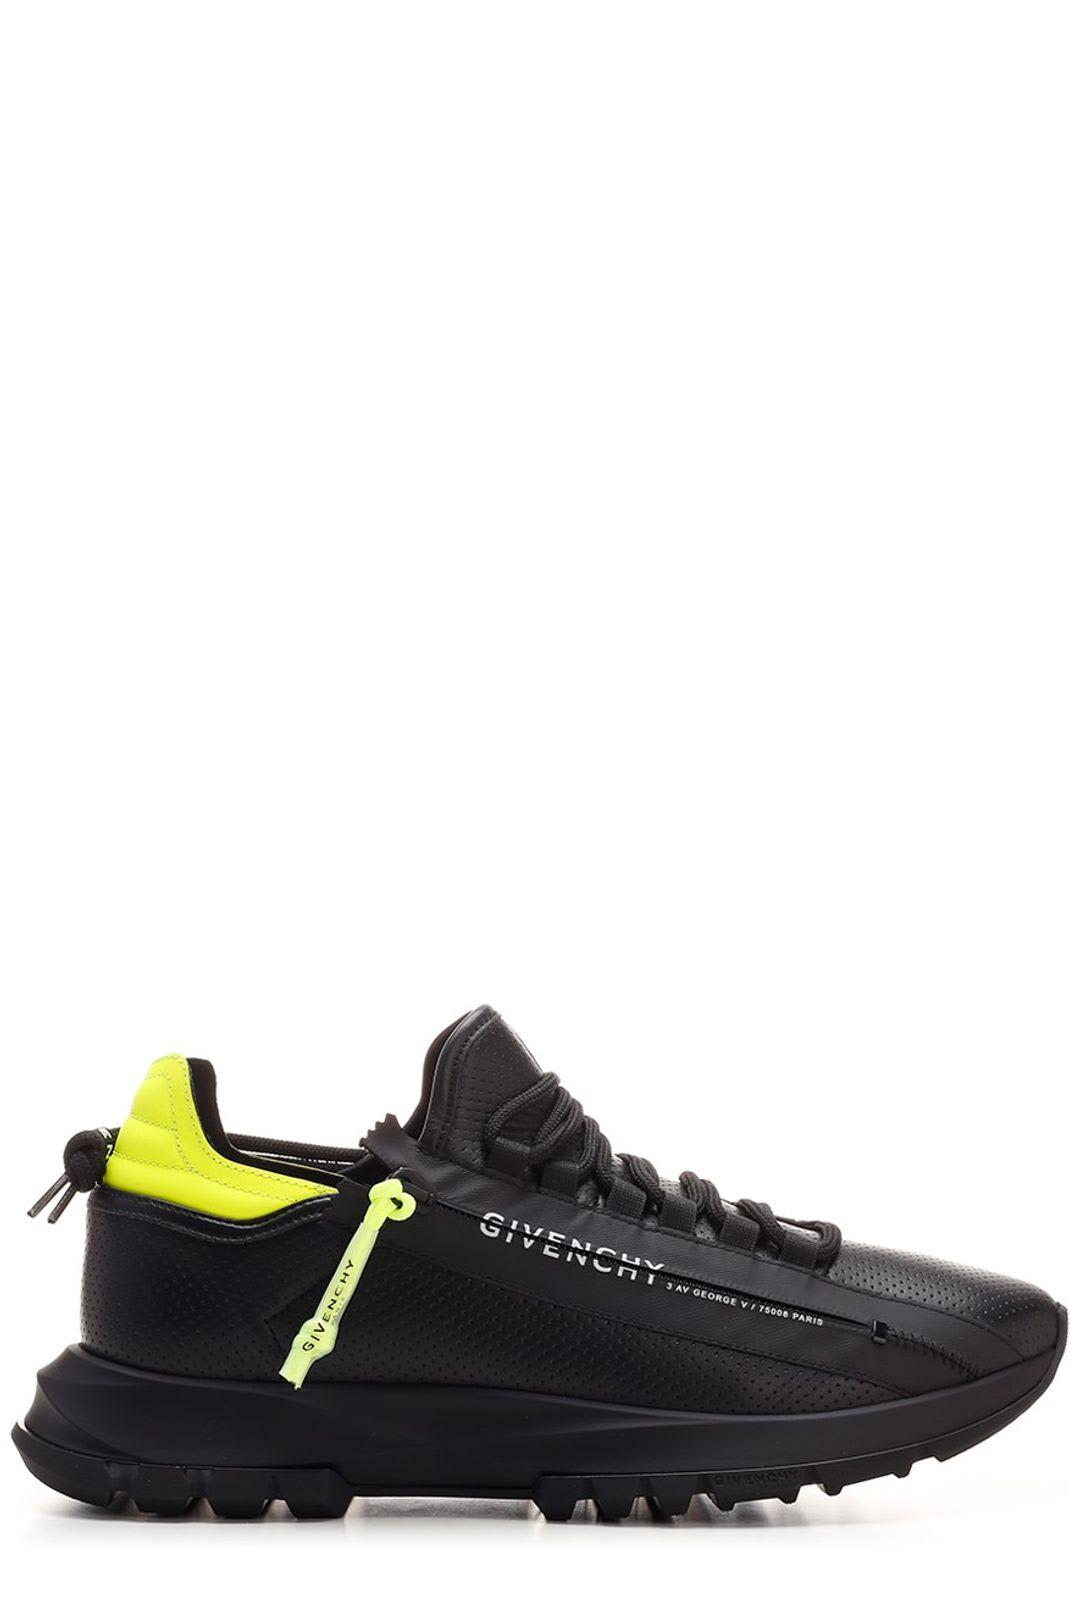 Givenchy Spectre Lace-up Sneakers